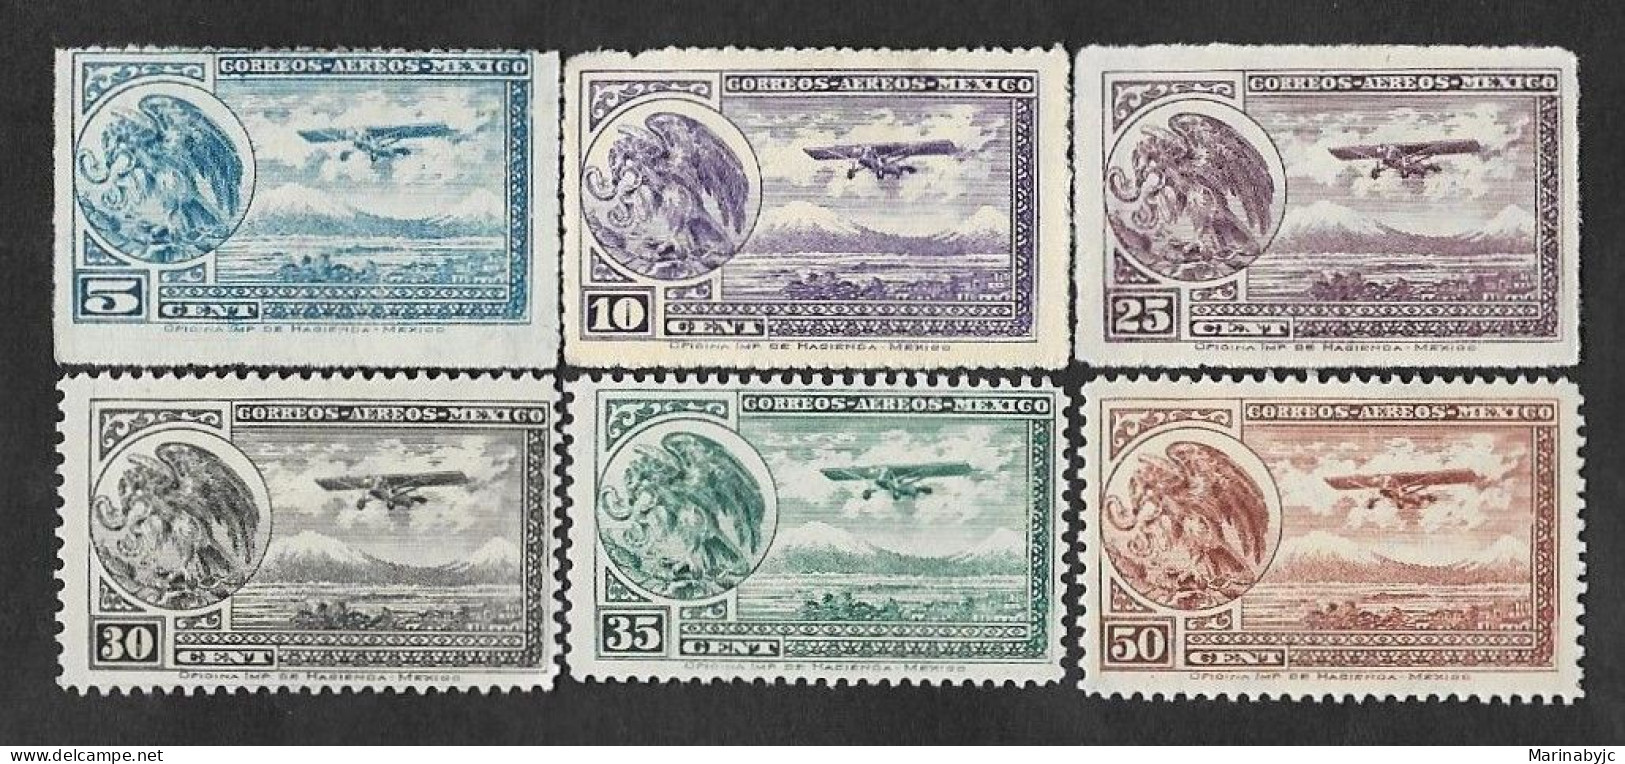 SE)1929-34 MEXICO  COAT OF ARMS AND FLYING PLANE 5C SCT C20 MINT, 10C SCT C21 MINT, 25C SCT C24 MINT, RULED & 30C SCT C1 - Mexico